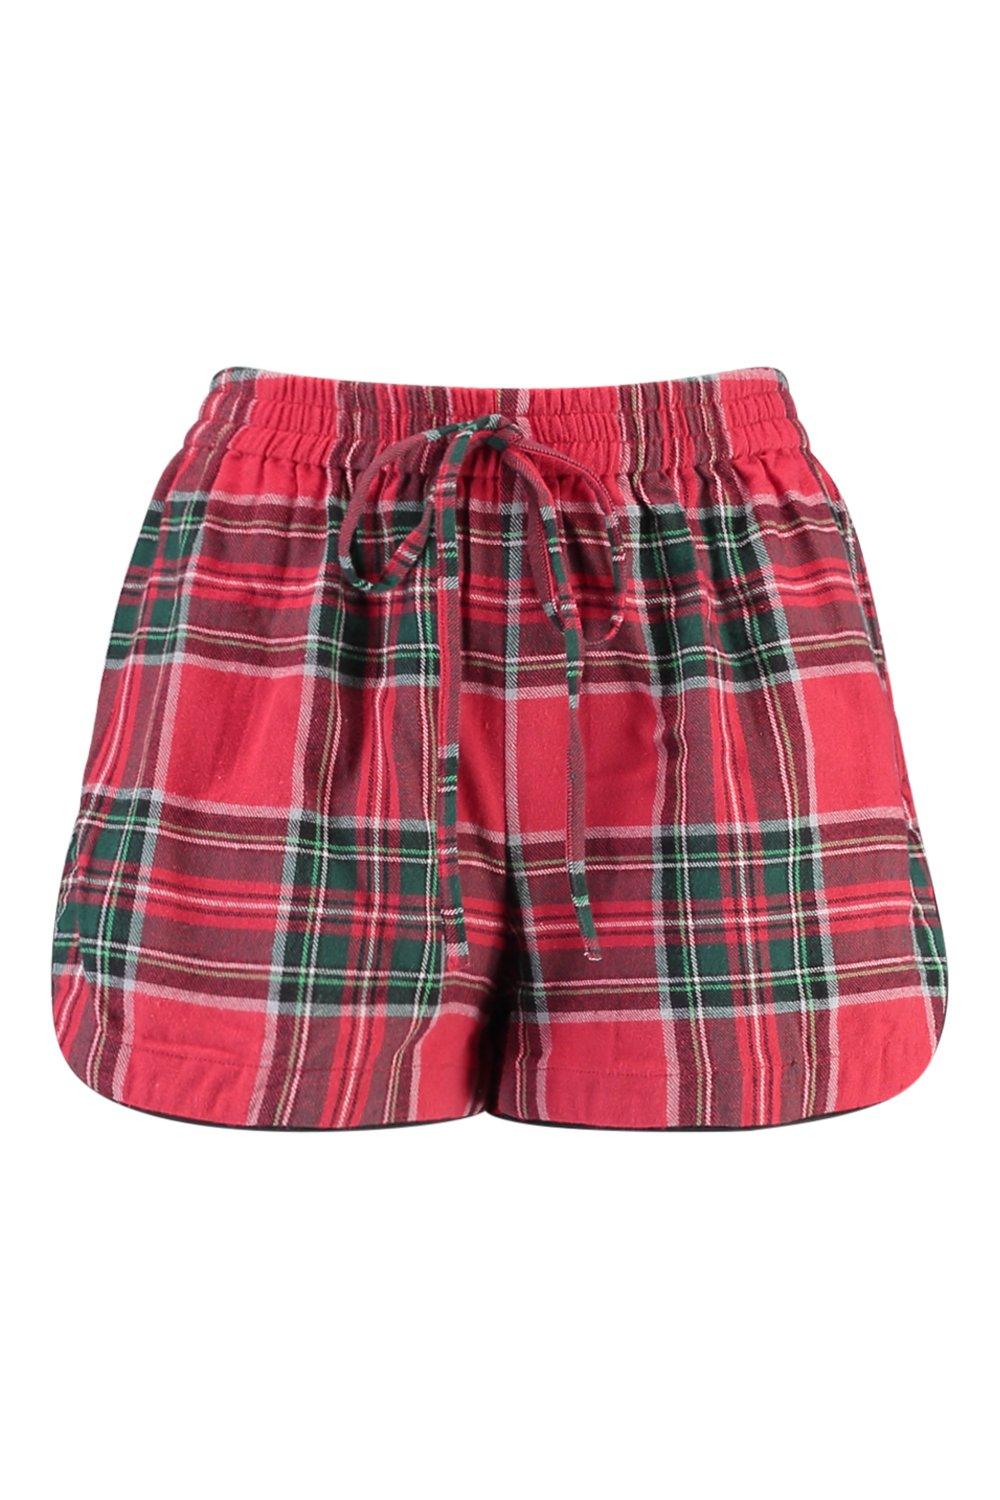 https://media.boohoo.com/i/boohoo/nzz87923_red_xl_4/female-red-mix-and-match-flannel-check-pj-shorts